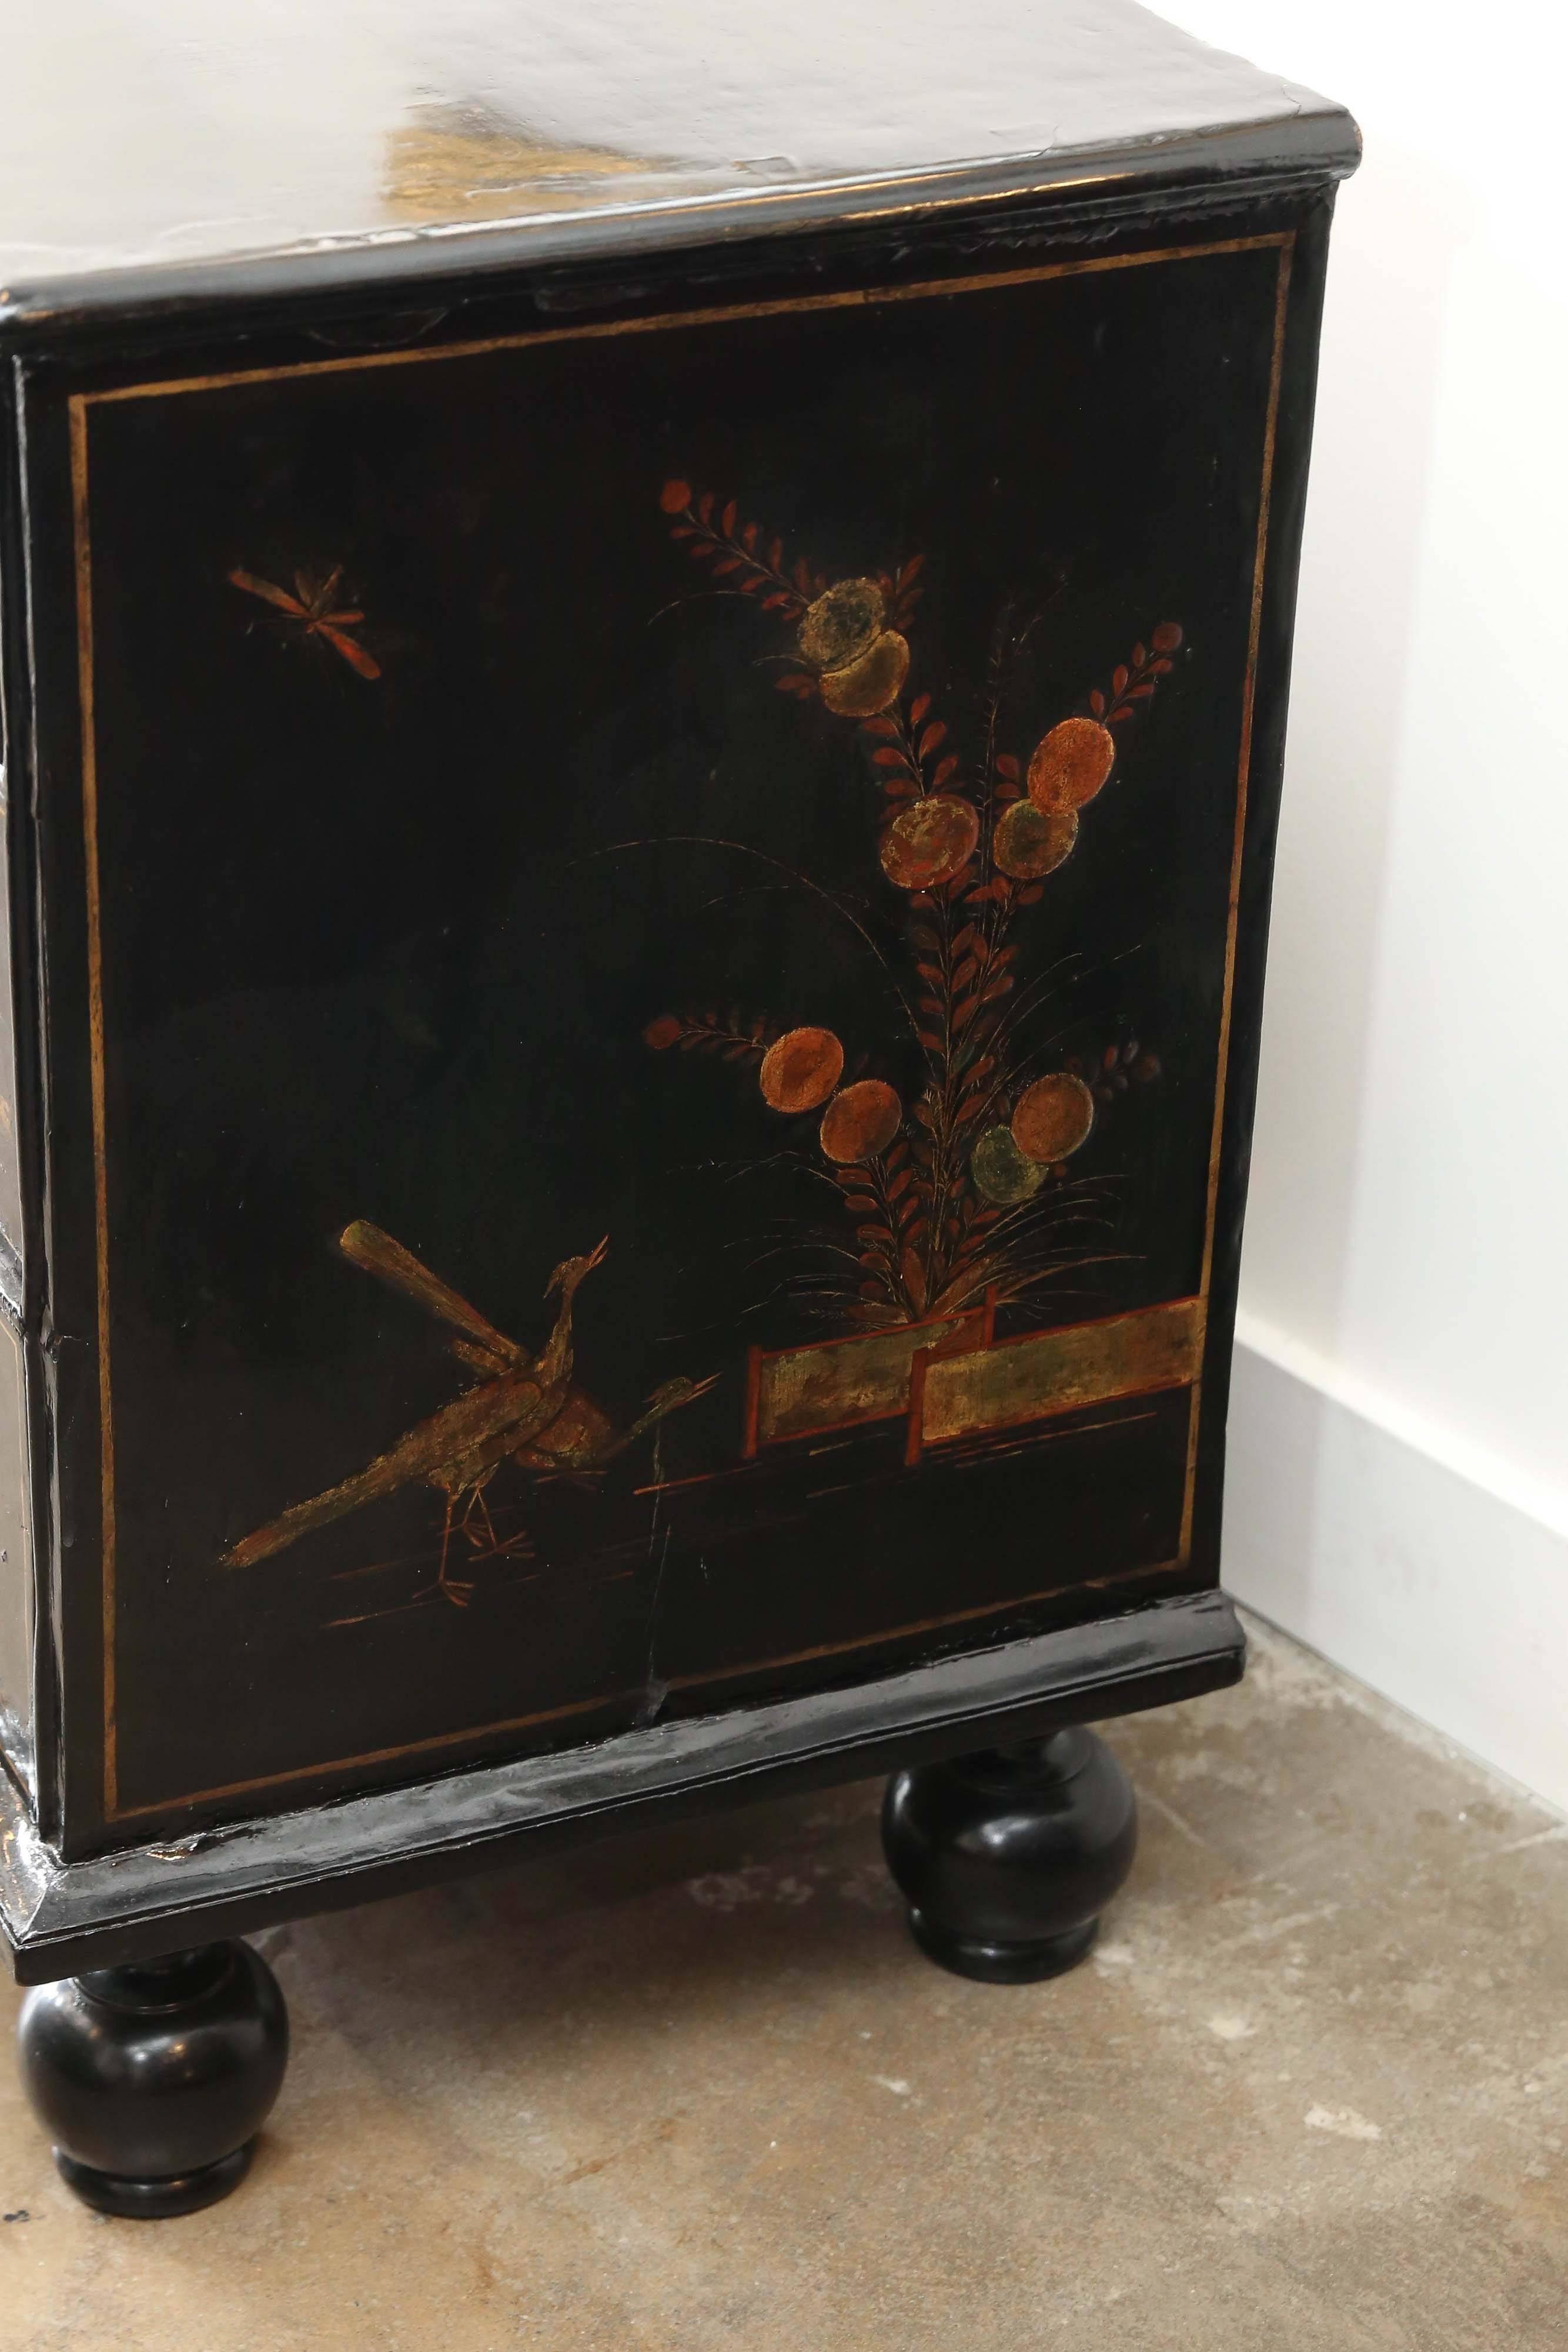 18th century English chinoiserie chest with two short drawers and two larger drawers on bun feet. Beautifully detailed raised gilt and color used to depict flowers, animals, people and scenes on a black lacquered background. Each drawer has a